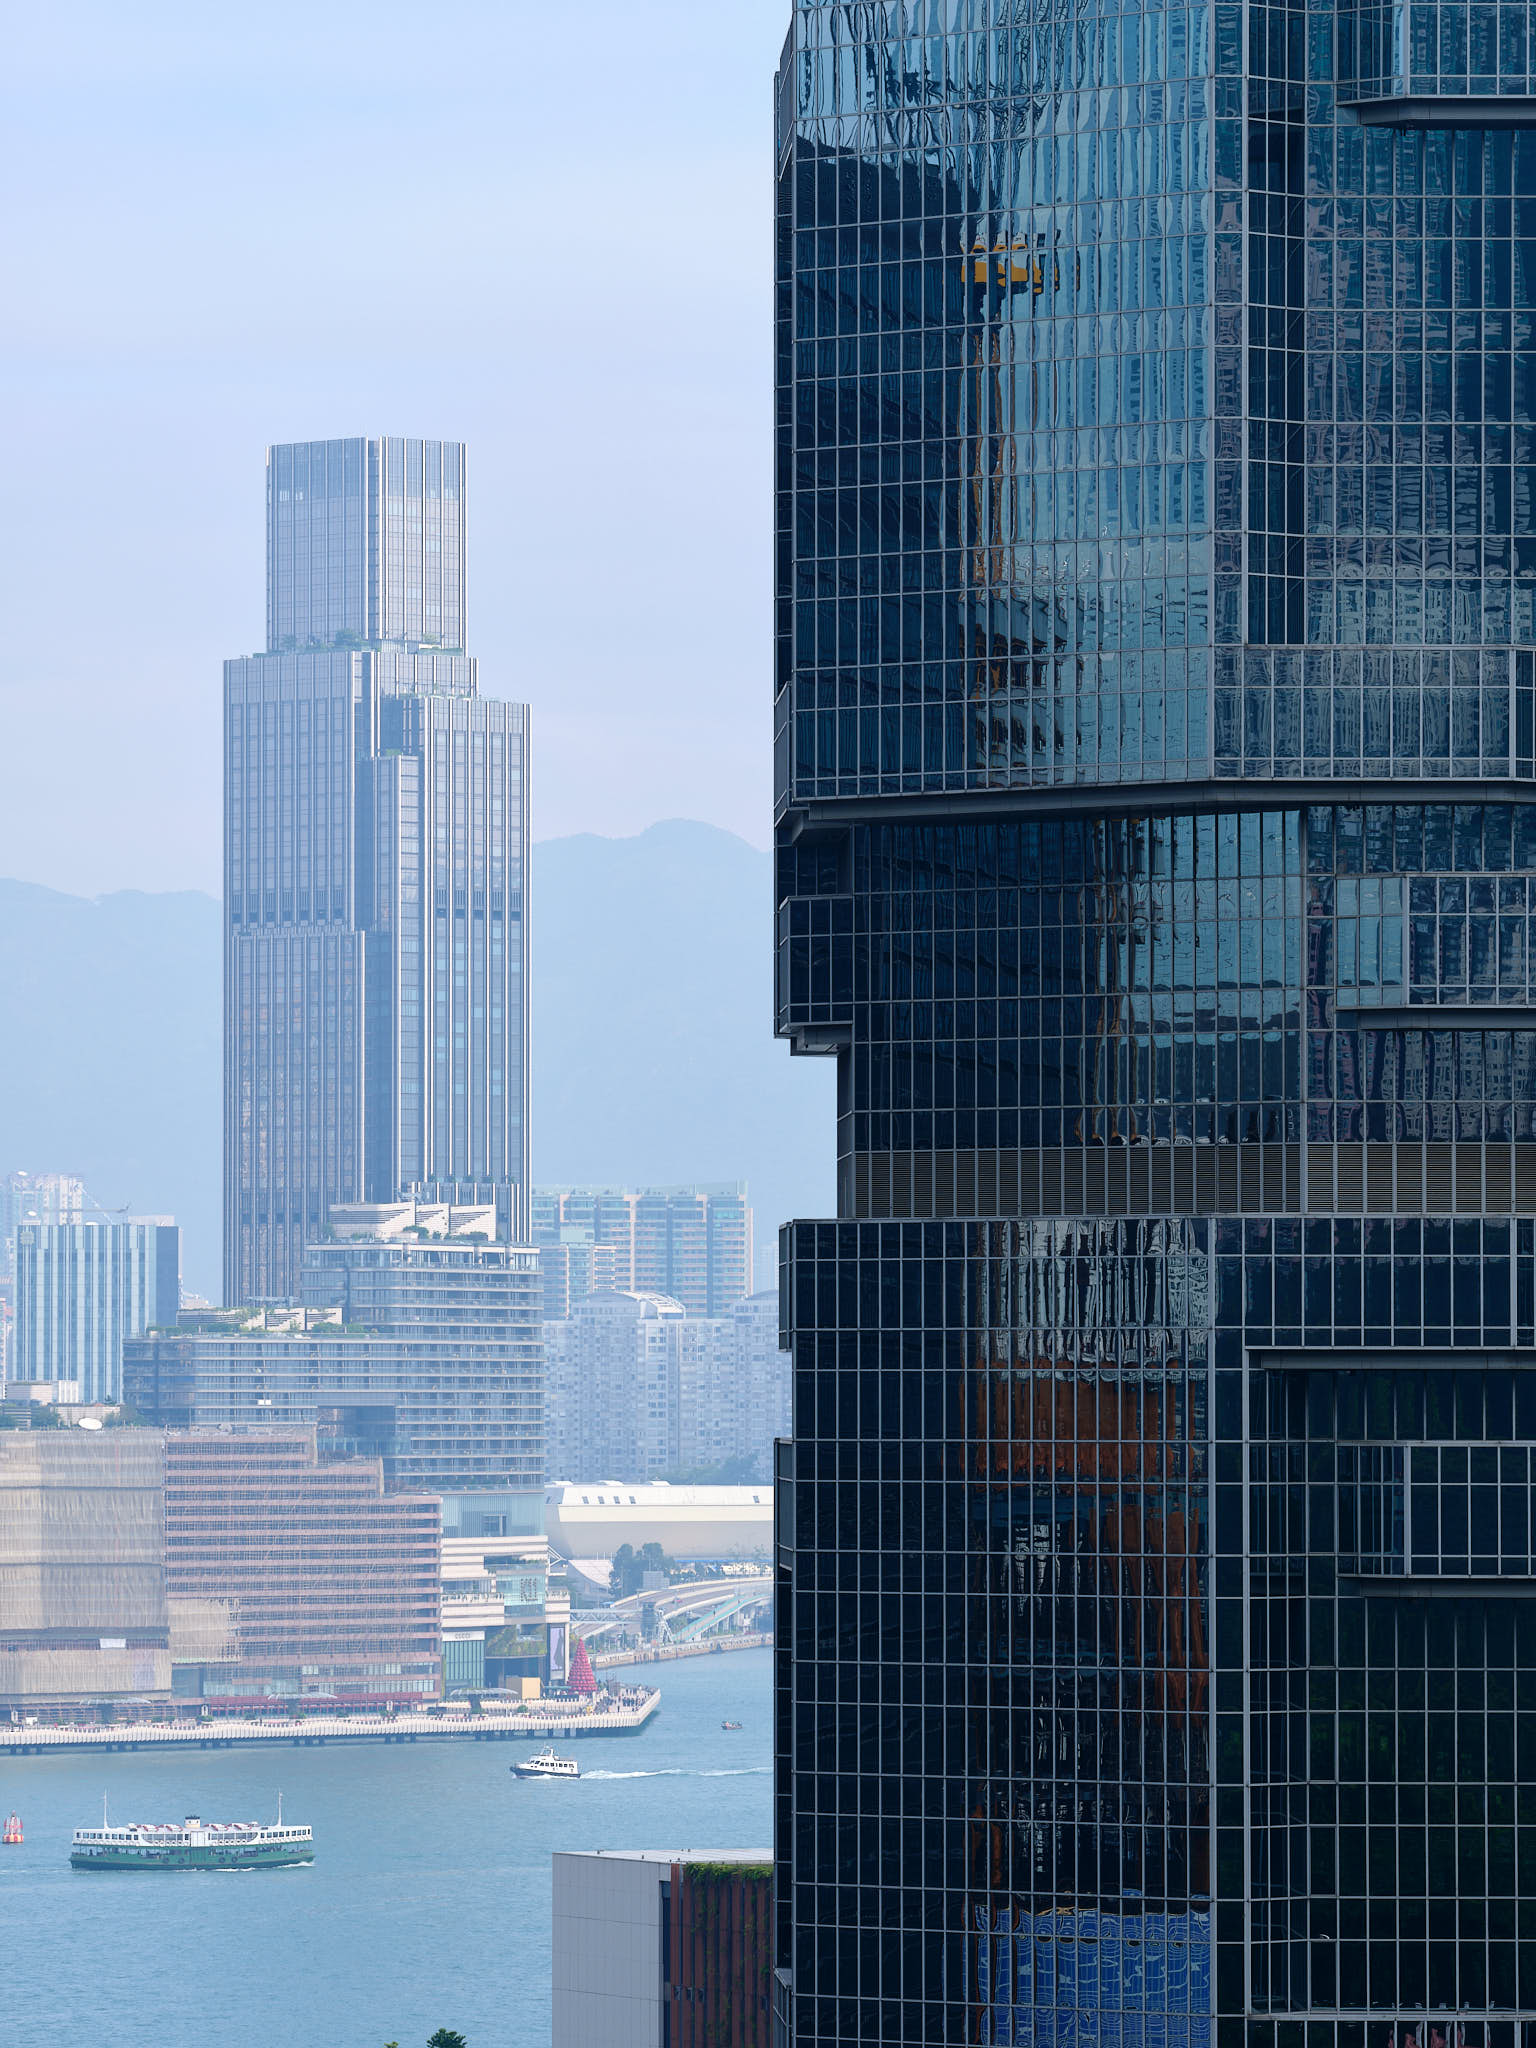 Lippo Centrę in the foreground and Rosewood Hotel in the background in Hong Kong